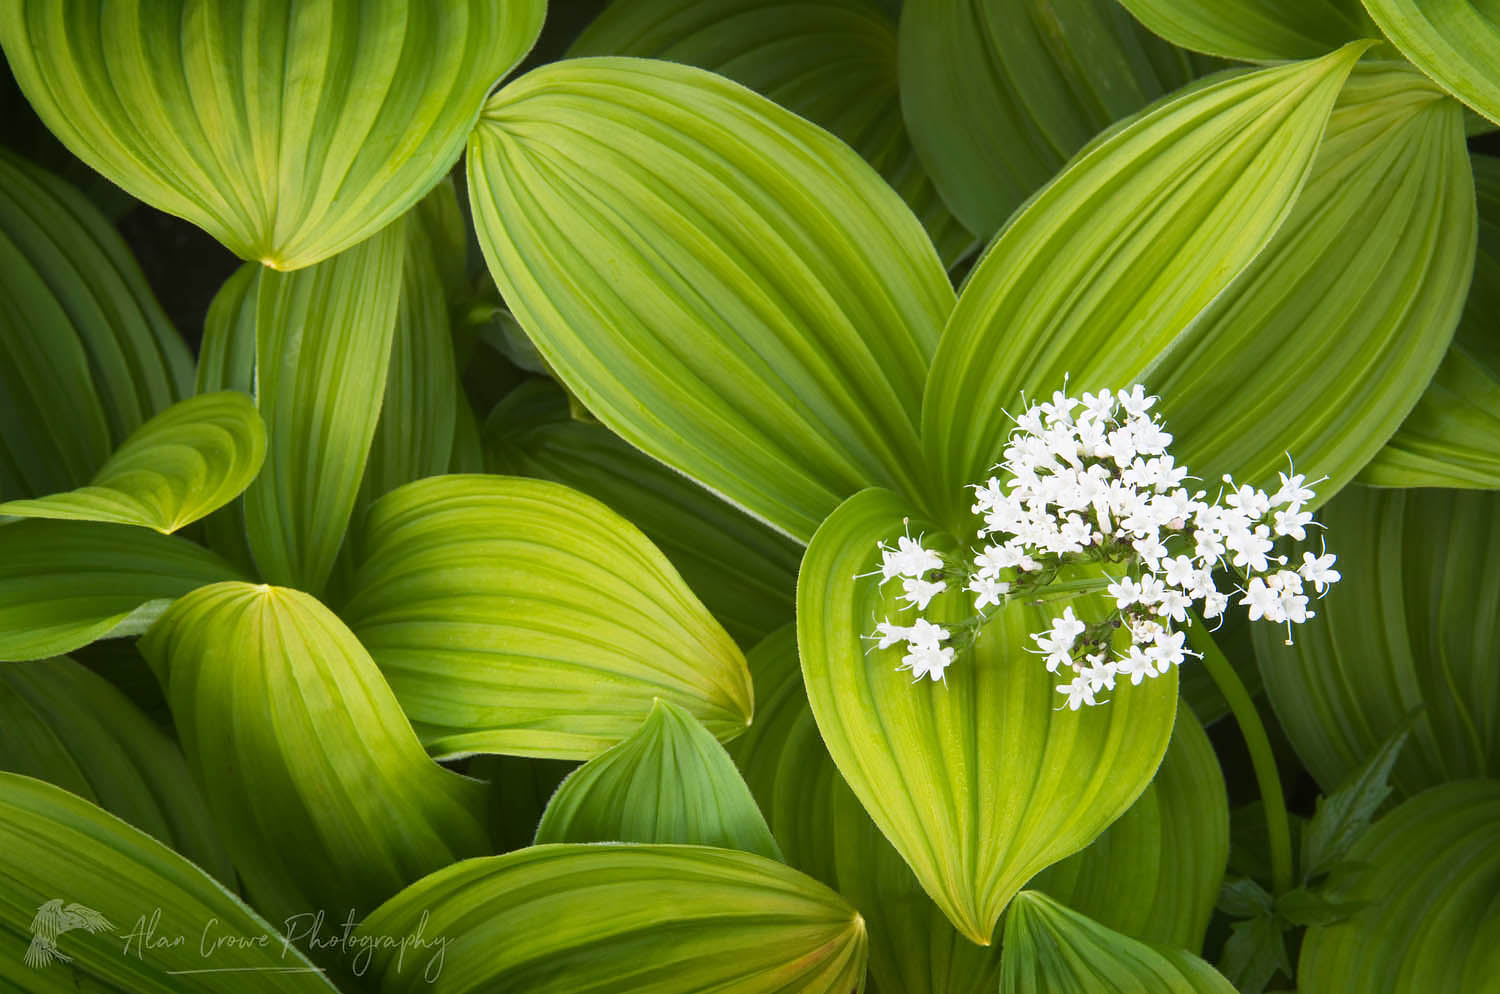 Corn Lily and Valerian